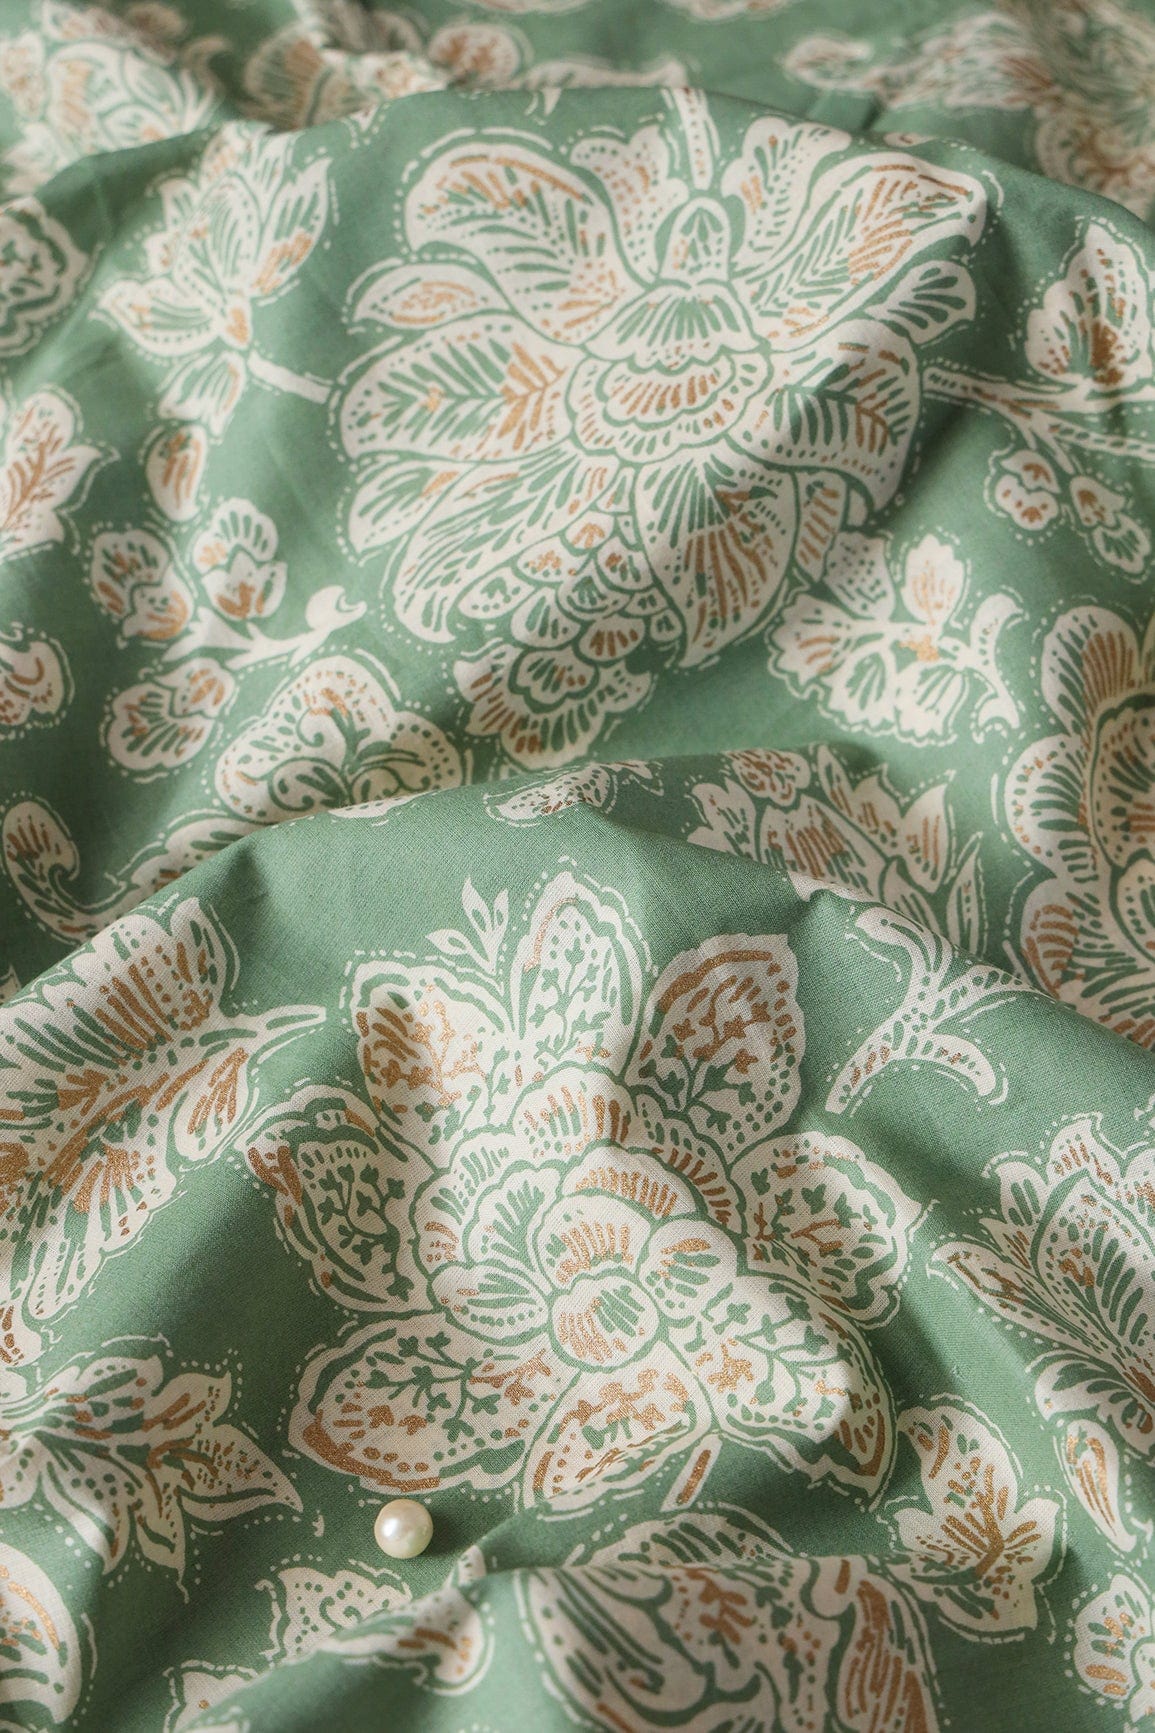 doeraa Prints Olive Green And Cream Floral Print On Pure Cotton Fabric